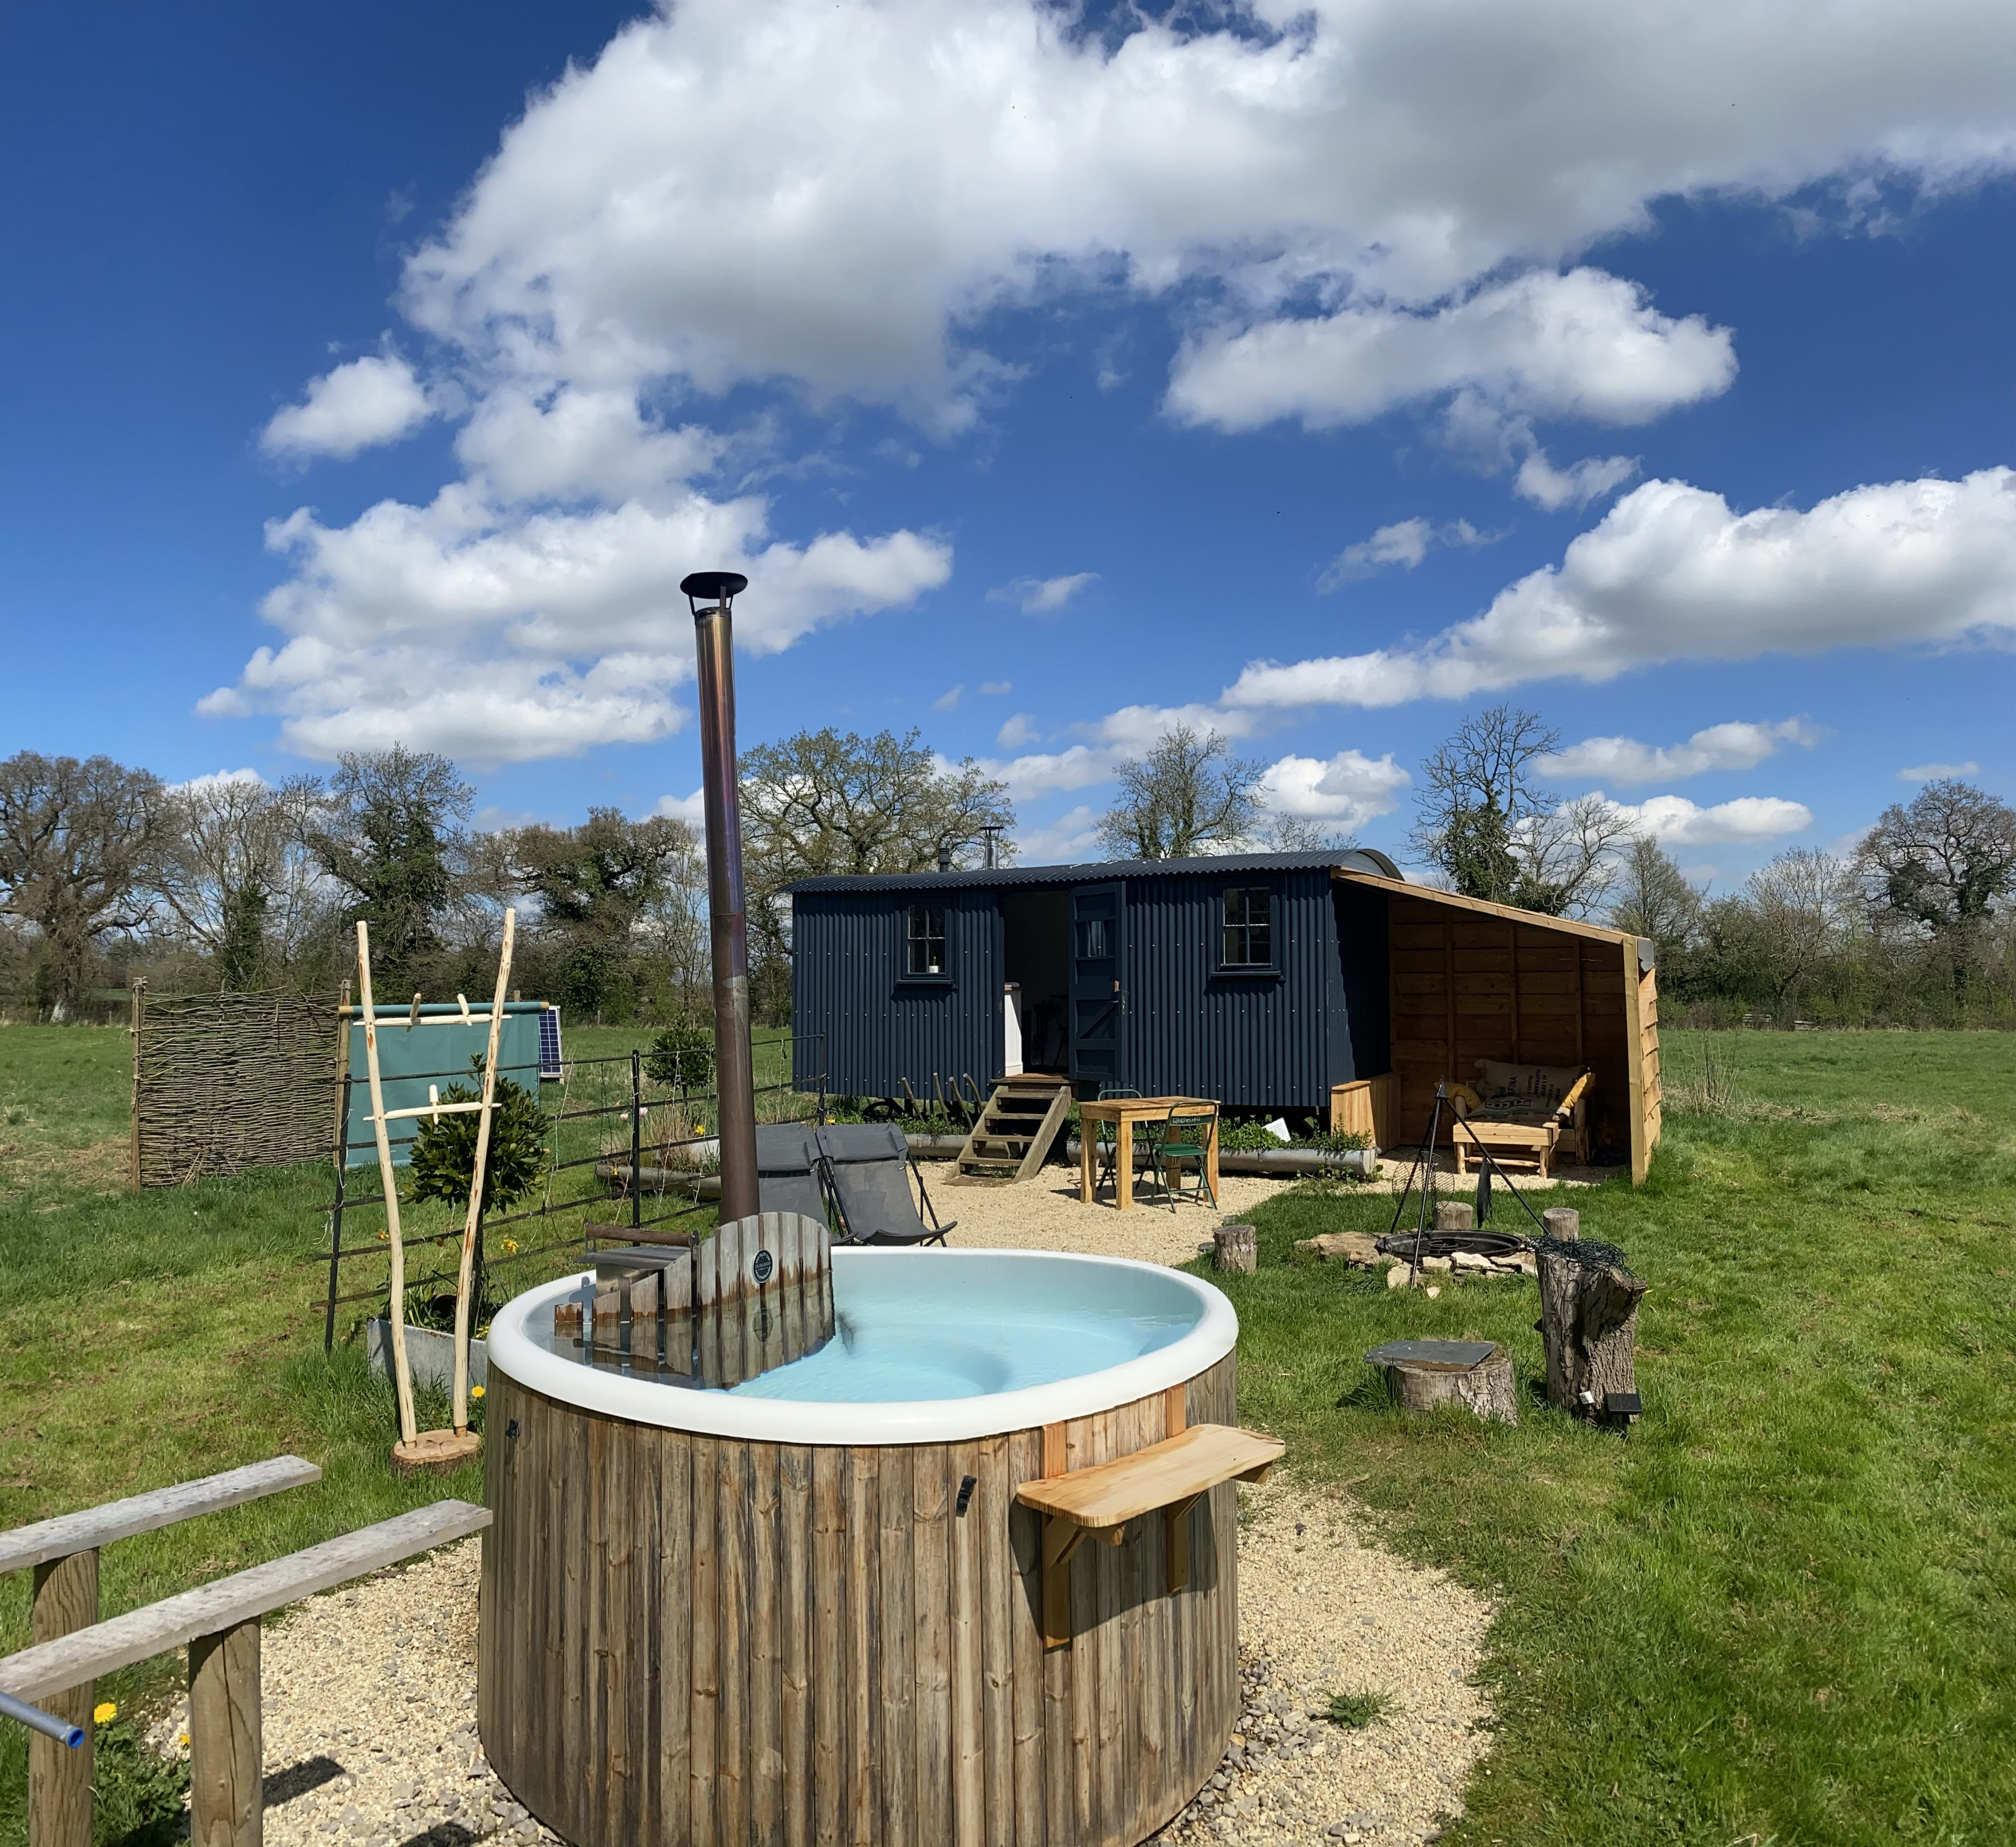 We have 3 off grid shepherds huts with hot tubs in a secluded field separate to the glamping campsite. These are for adults only.